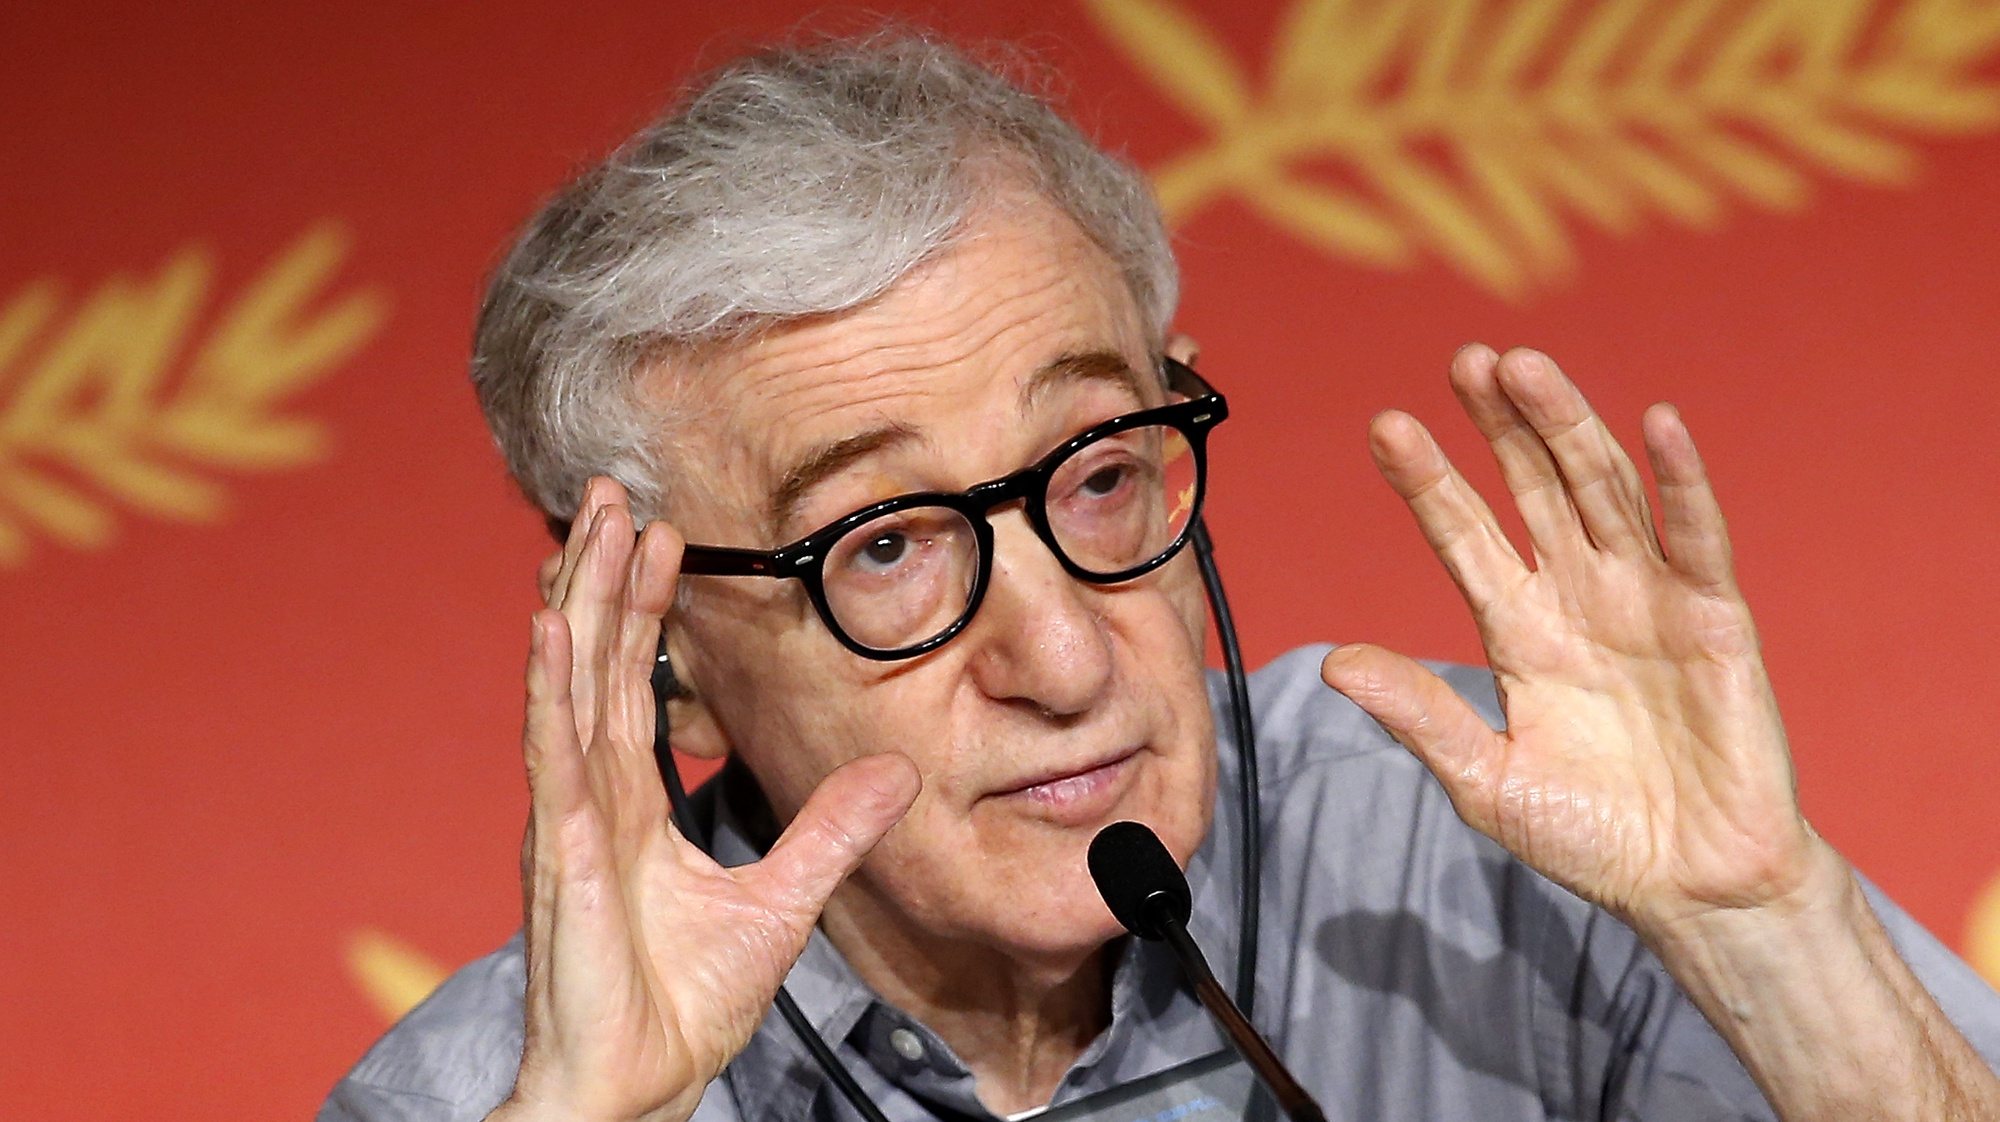 epa07785453 (FILE)  US director Woody Allen attends the press conference for &#039;Cafe Society&#039; during the 69th Cannes Film Festival, in Cannes, France, 11 May 2016. It was announced on 22 August 2019 that Allen&#039;s movie &#039;A Rainy Day in New York&#039; will open the Deuville Film Festival on 06 September.  EPA/SEBASTIEN NOGIER *** Local Caption *** 52748215